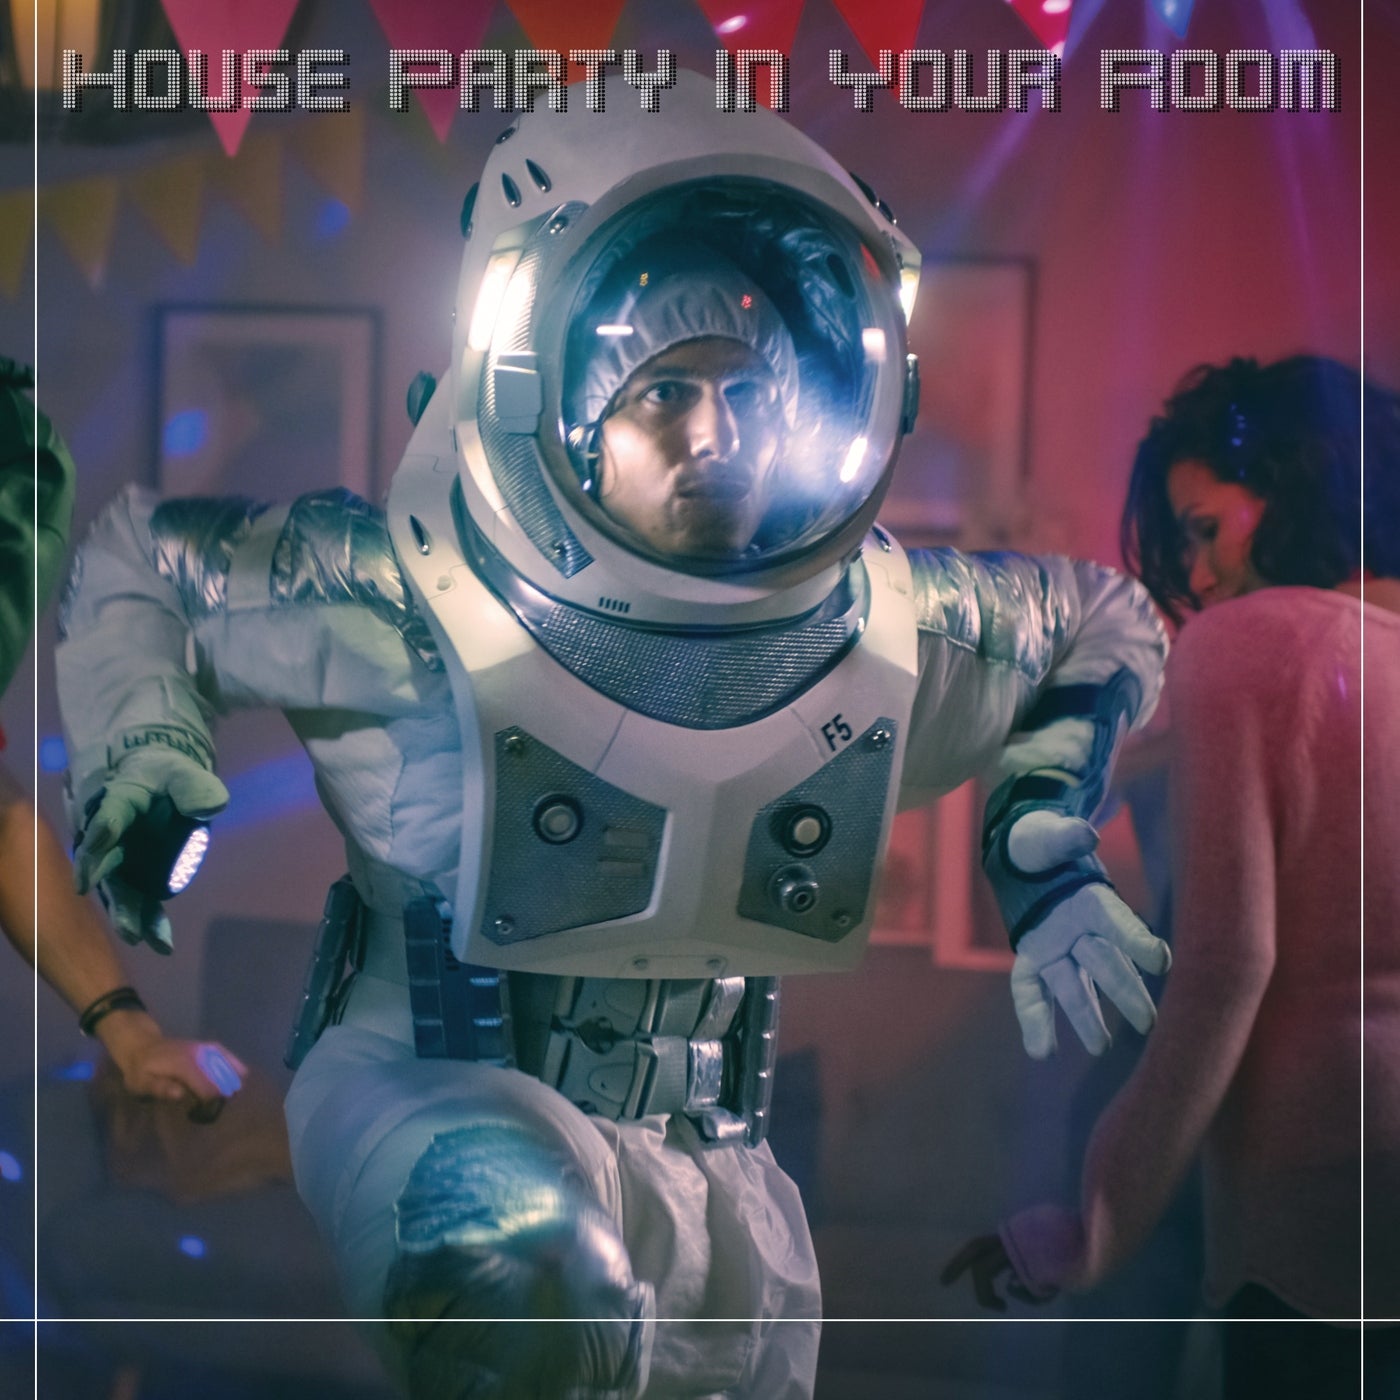 House Party in Your Room